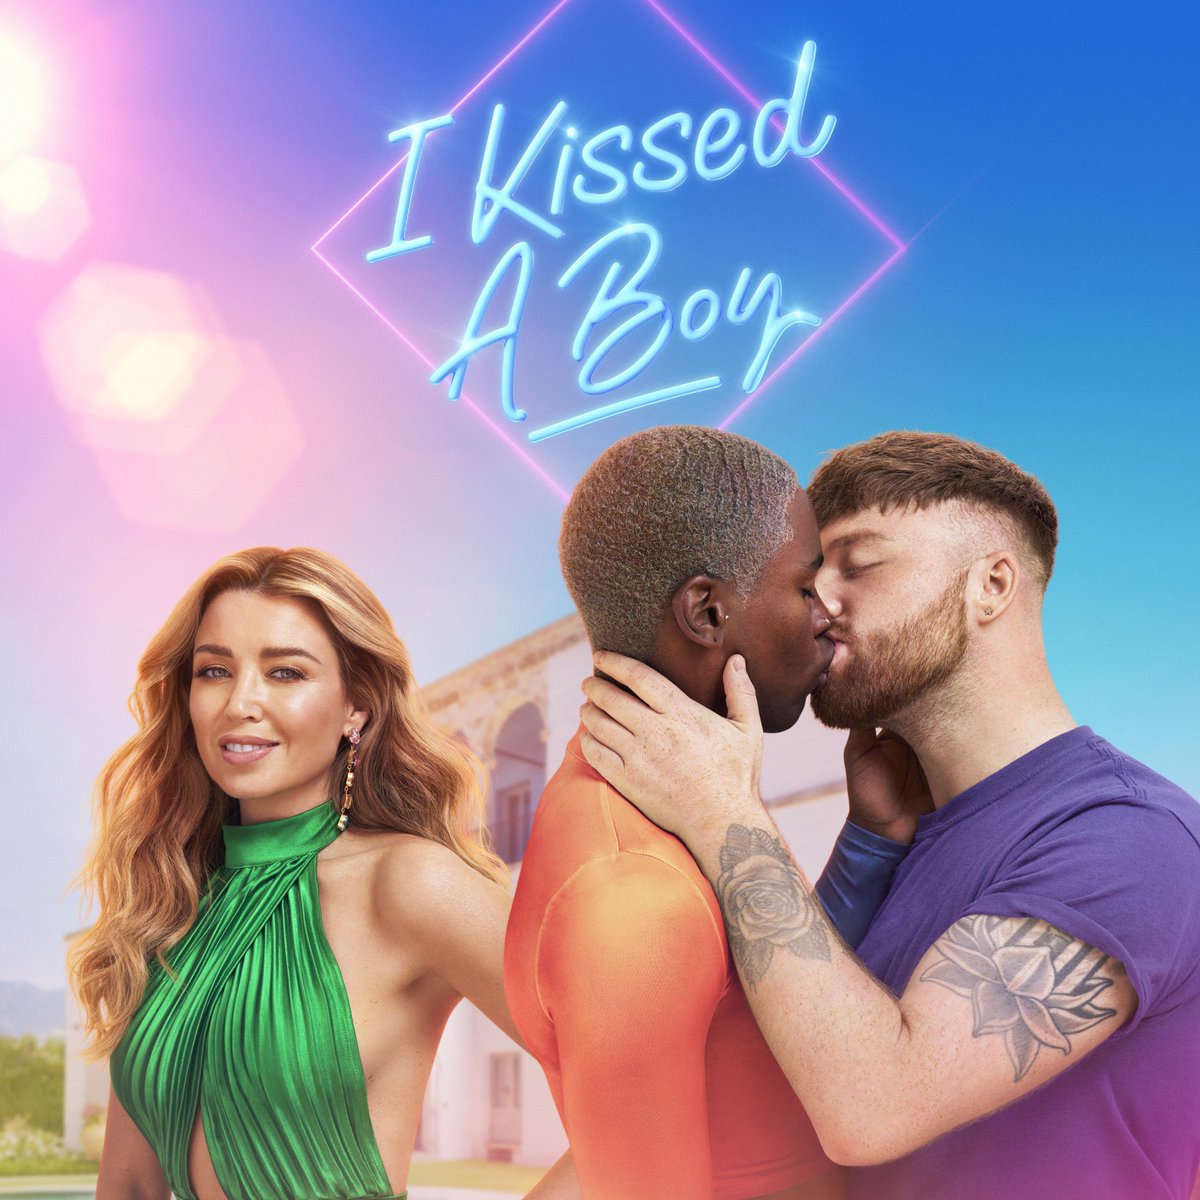 NEW! The BBC has announced announced that I Kissed A Boy - where the path to true love is never straight – will return for a second series. Host Dannii Minogue and voice over Layton Williams will be back, with casting now open